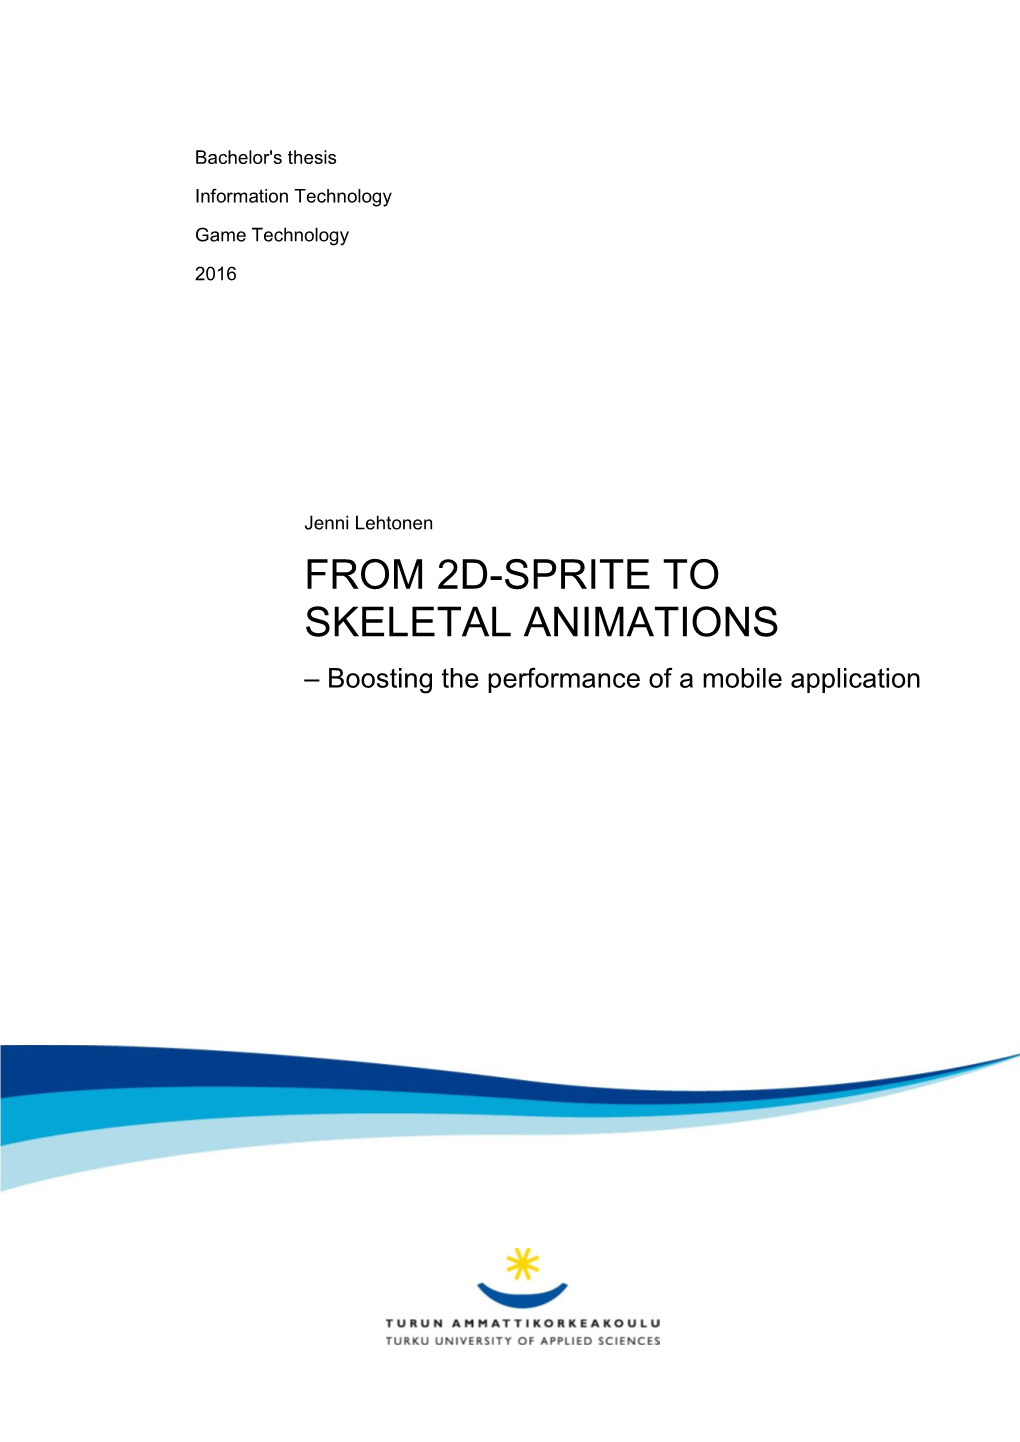 FROM 2D-SPRITE to SKELETAL ANIMATIONS – Boosting the Performance of a Mobile Application